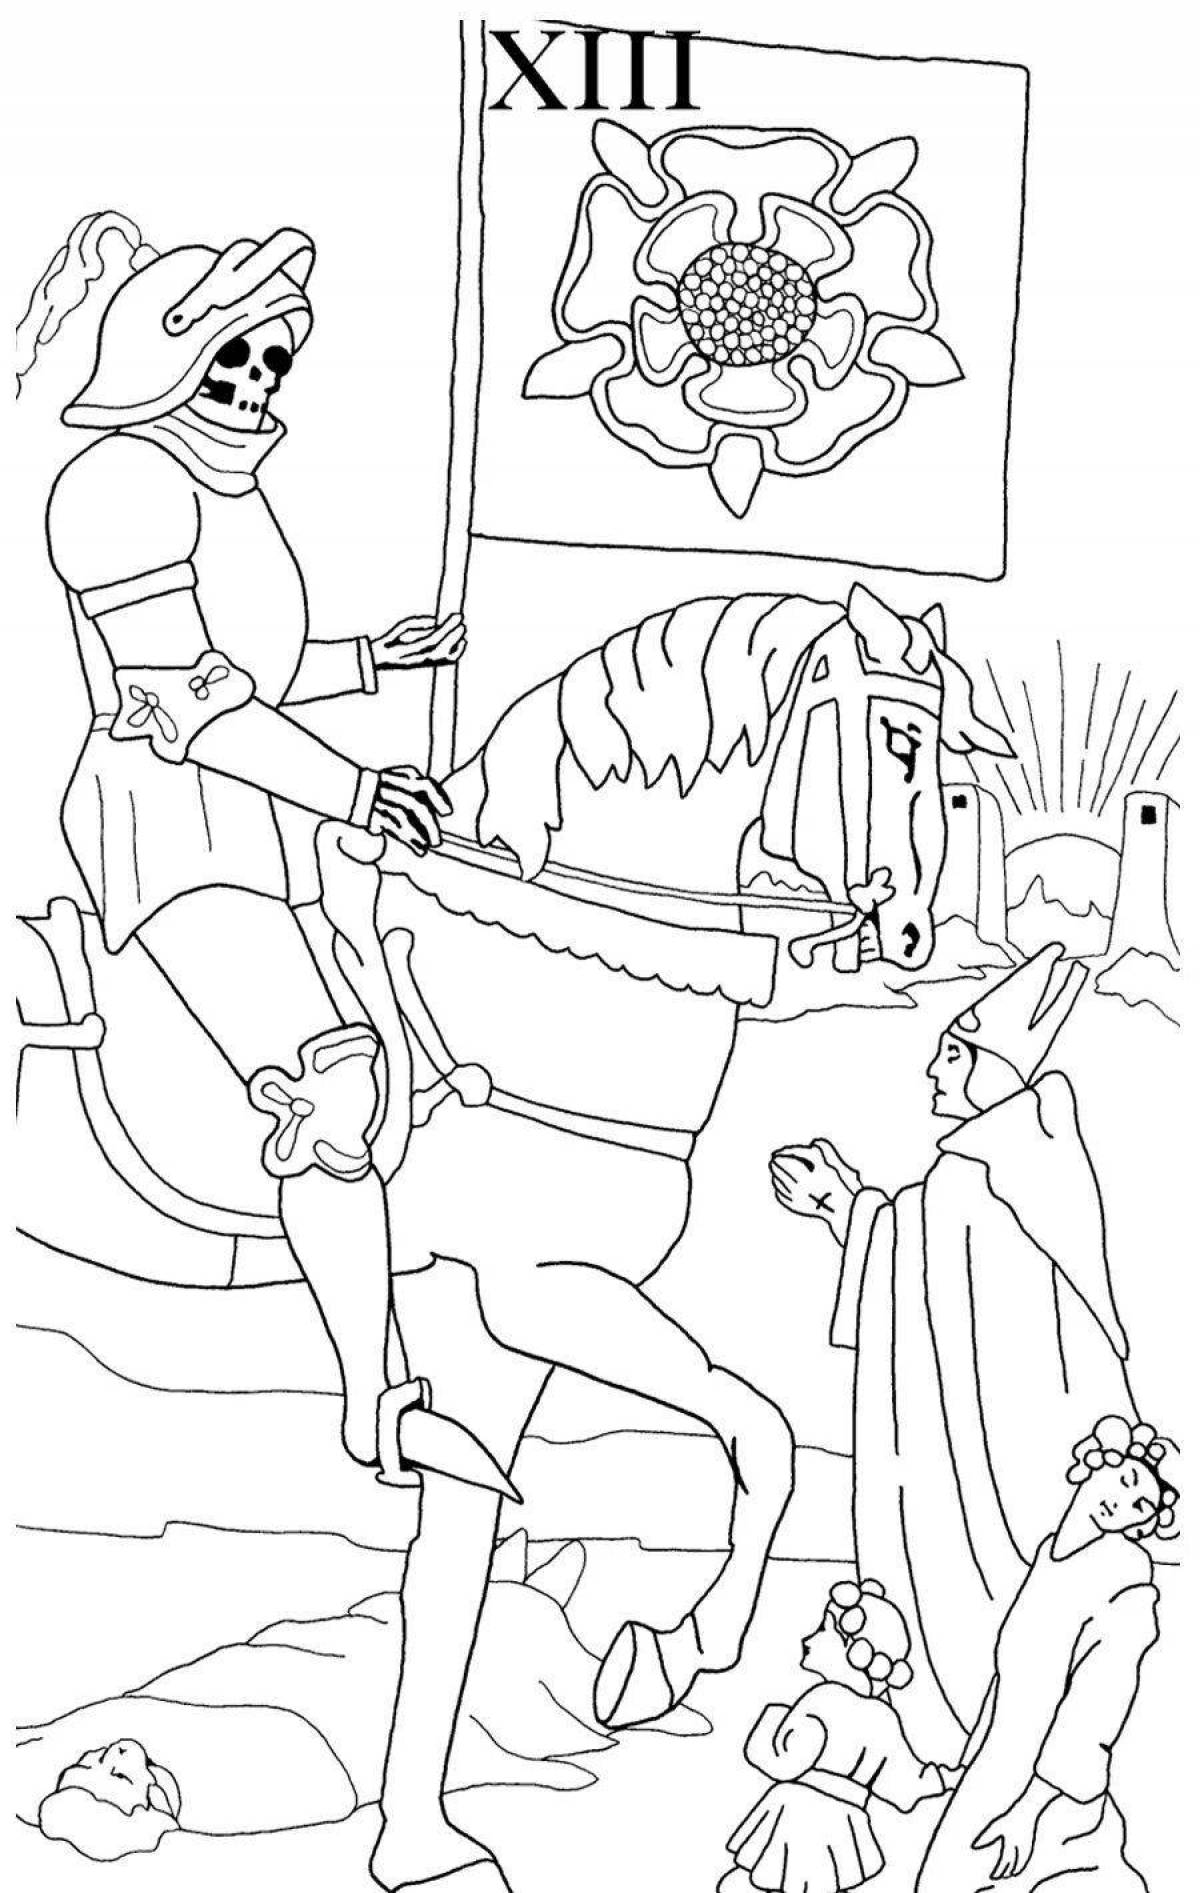 Charming tarot coloring pages